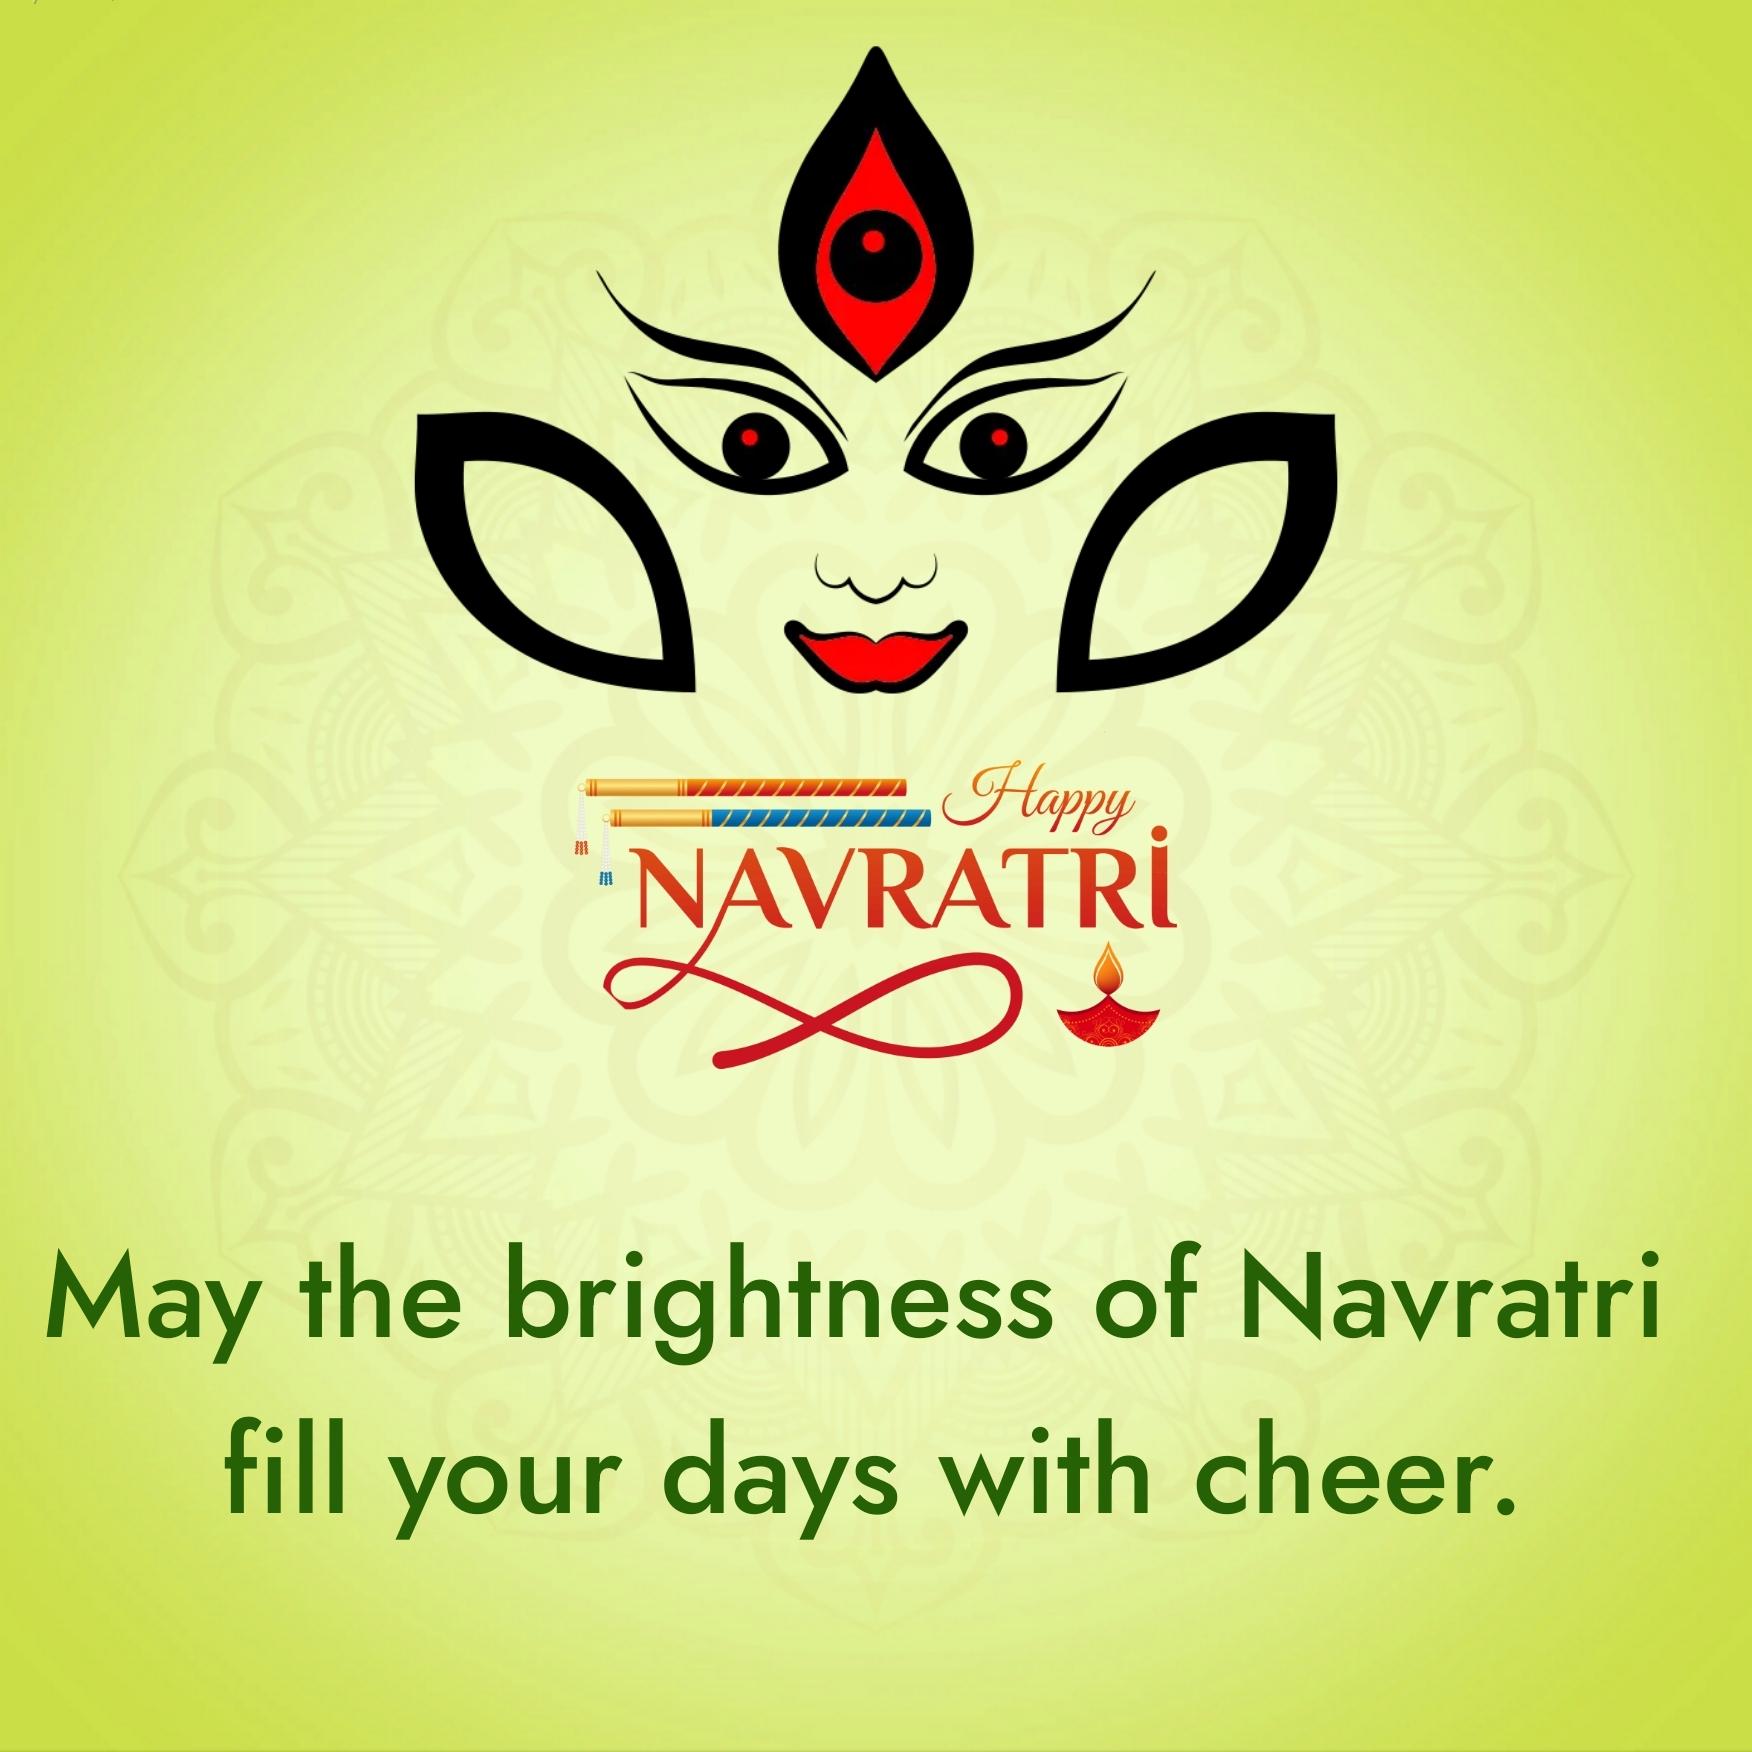 May the brightness of Navratri fill your days with cheer